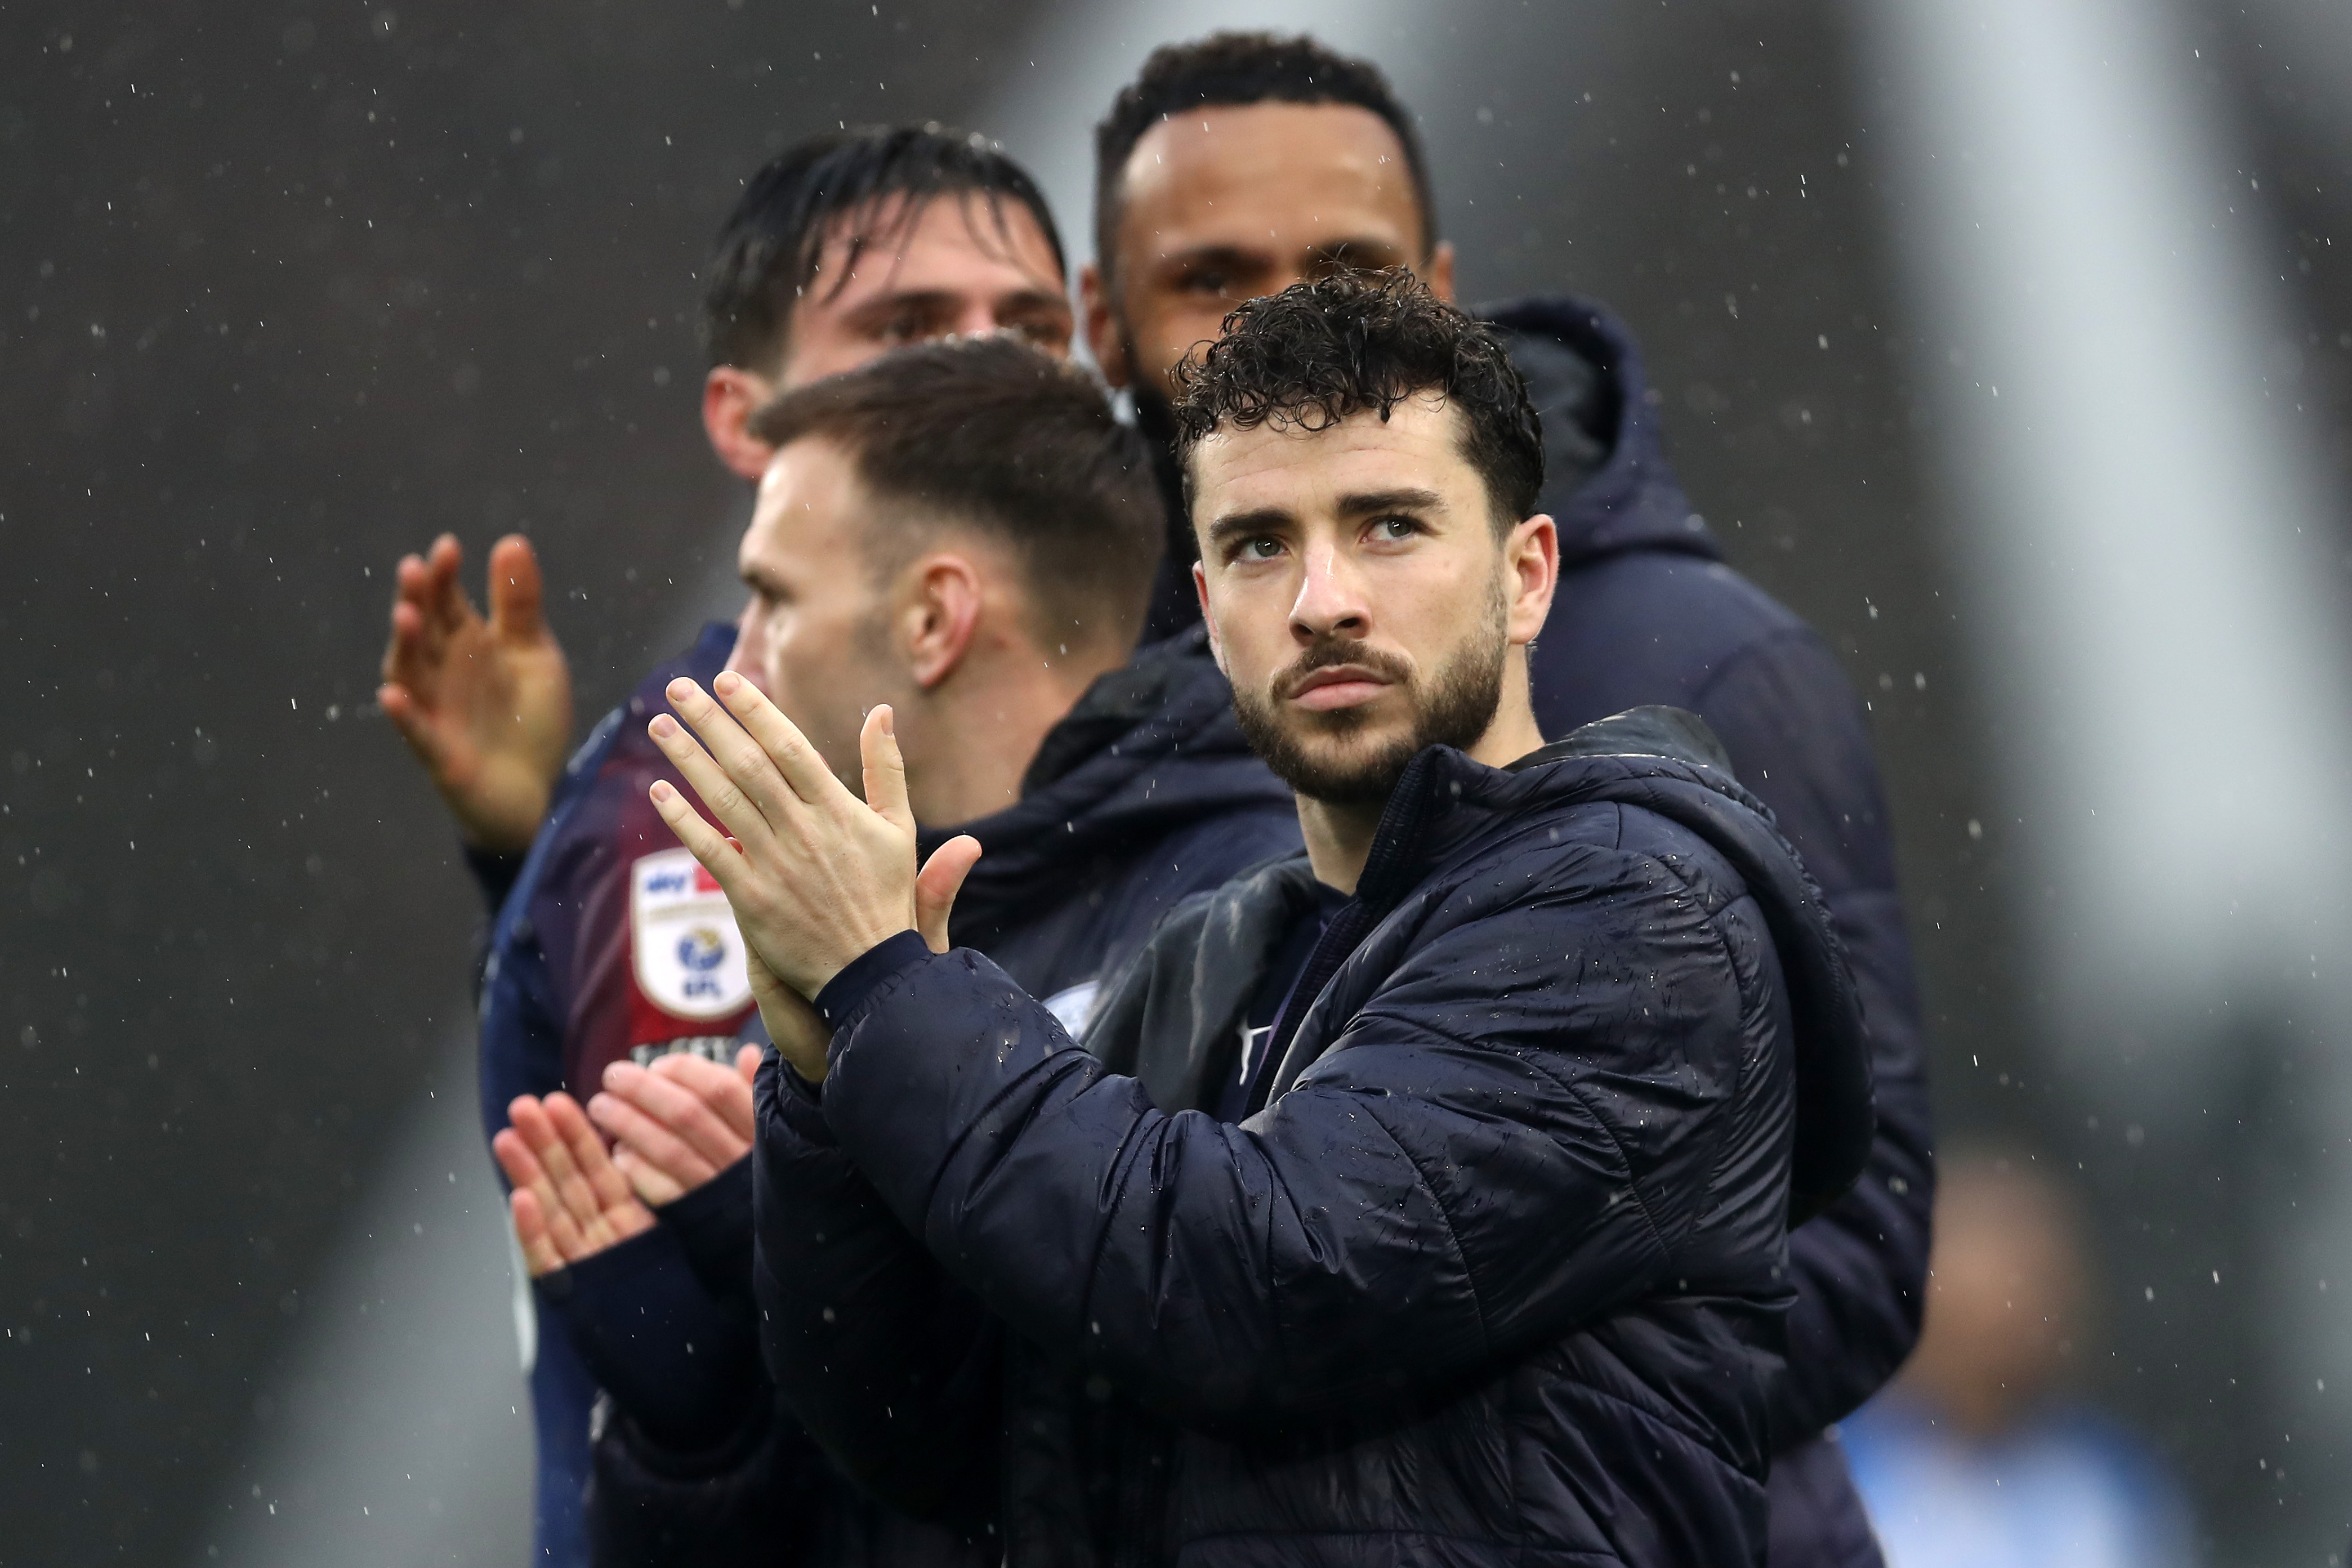 Mikey Johnston applauding Albion fans while wearing a coat in the rain